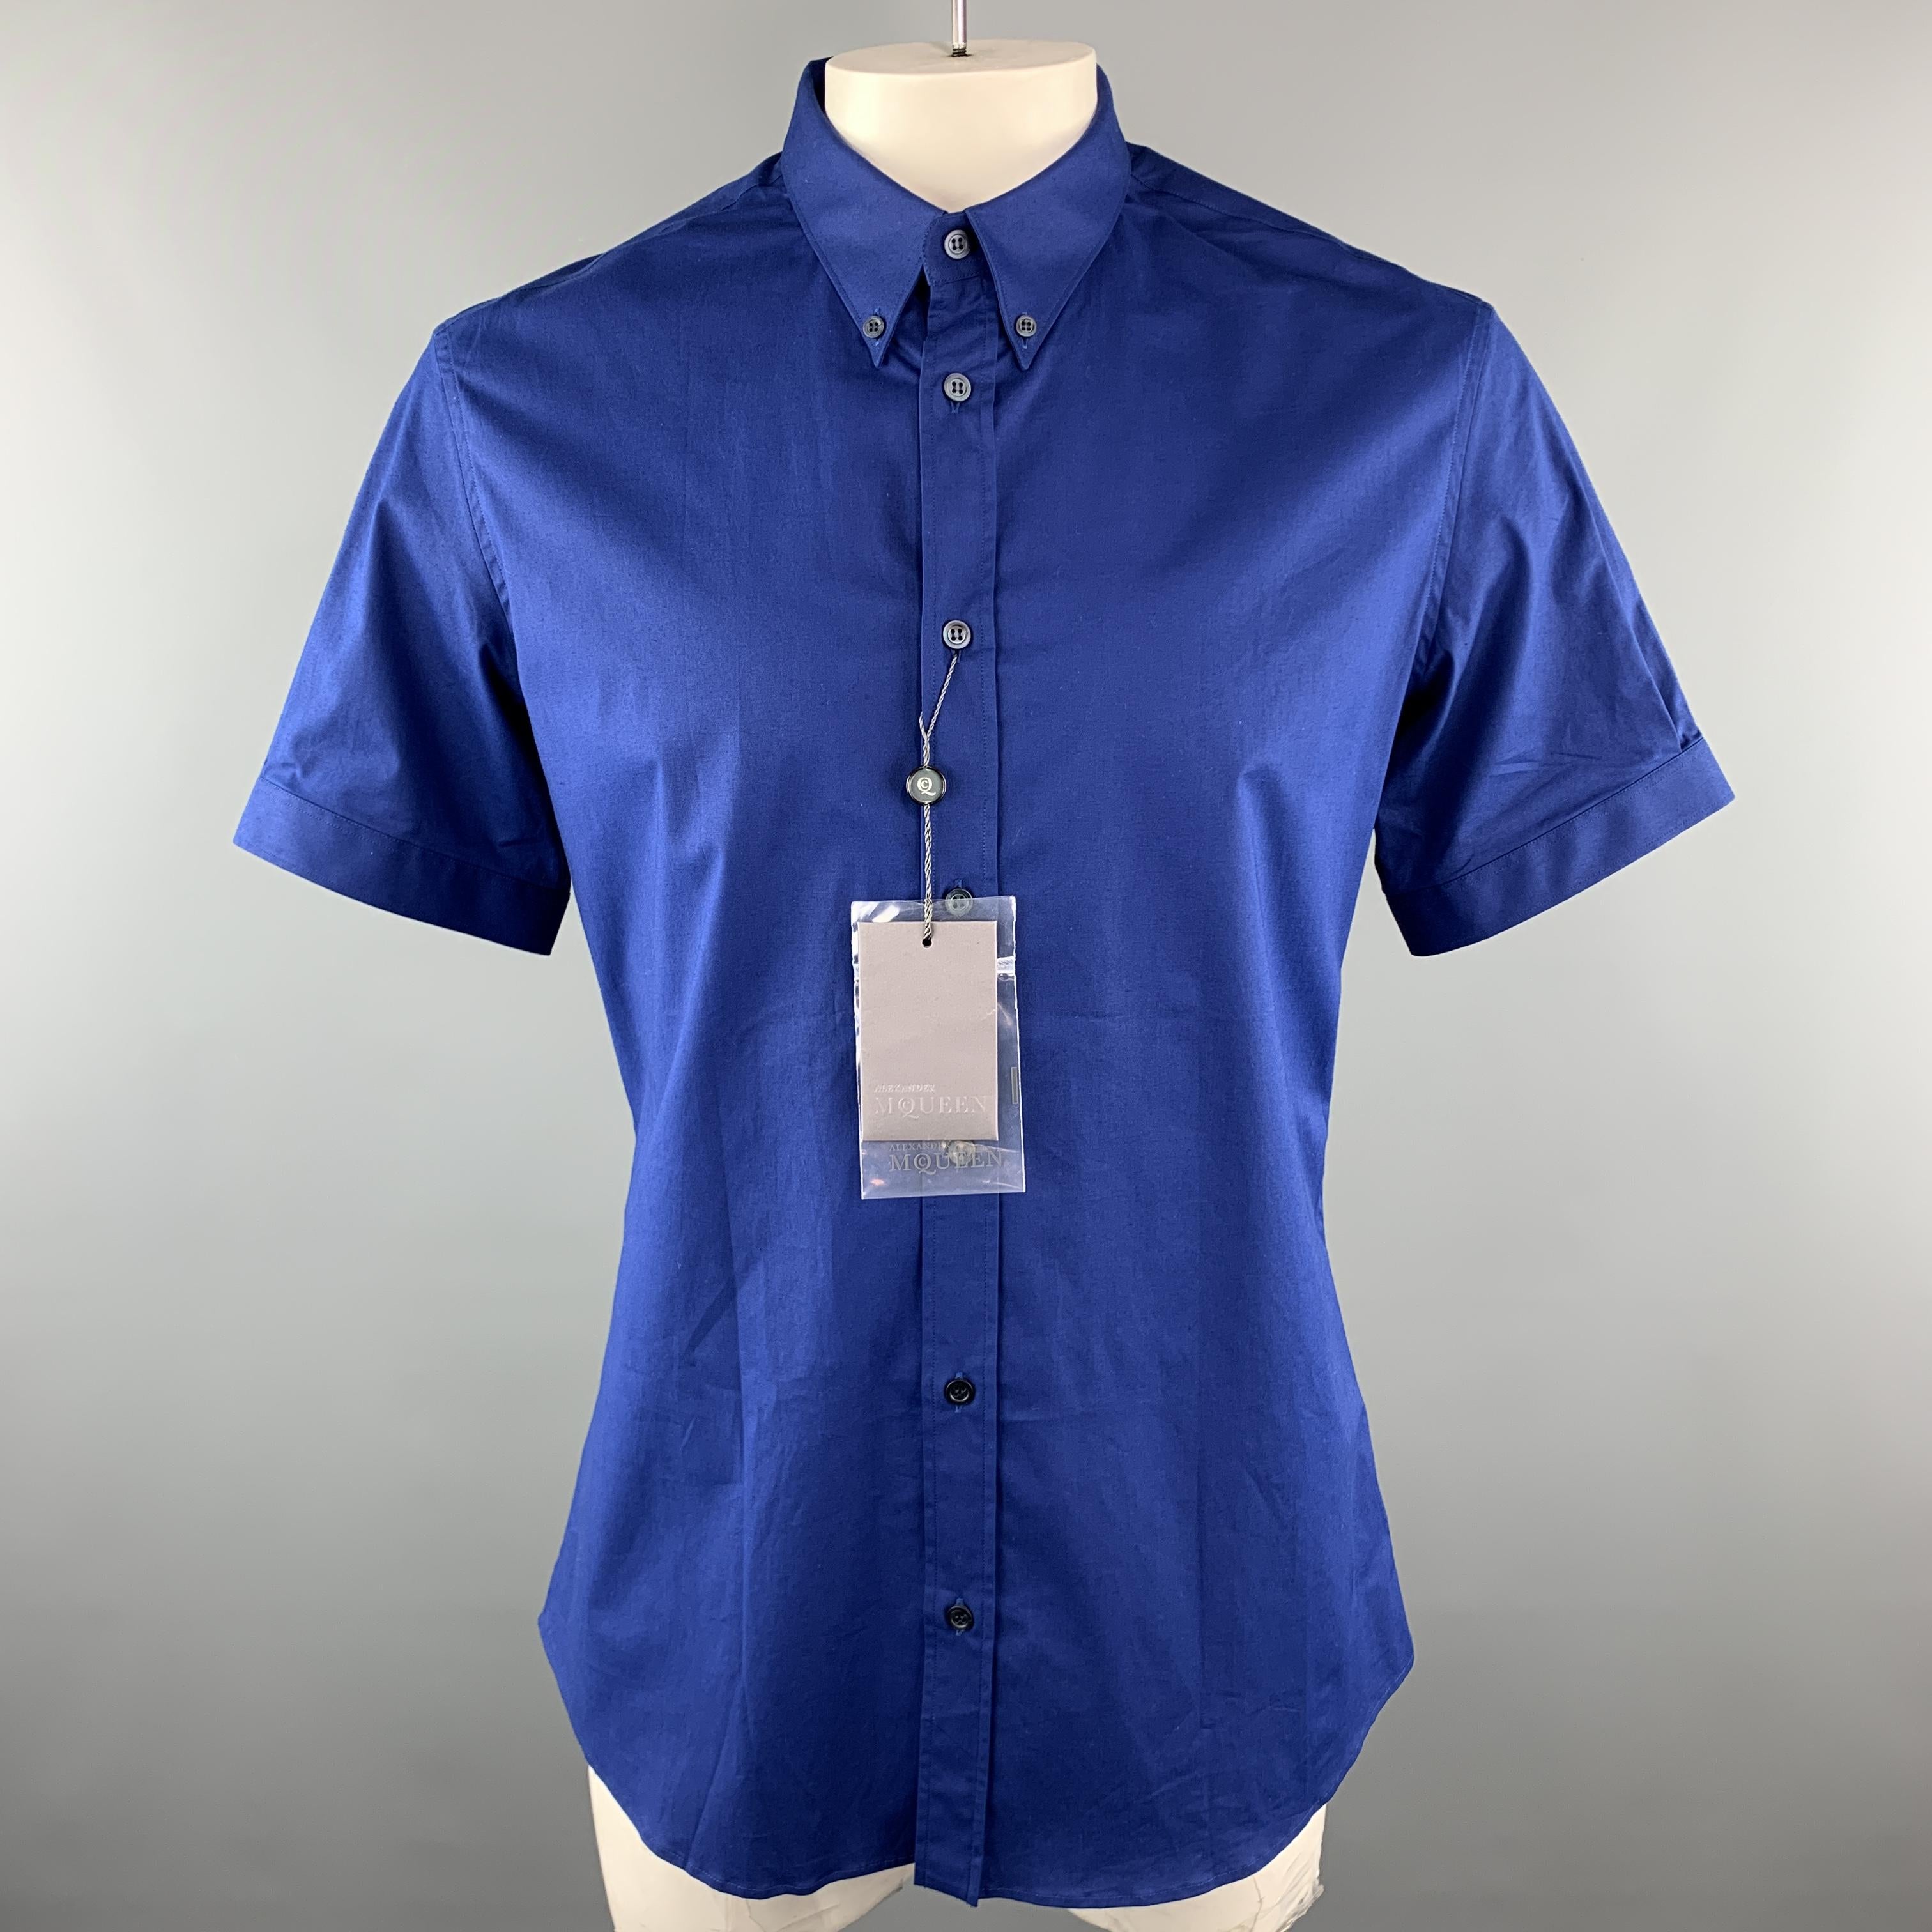 ALEXANDER MCQUEEN Short Sleeve Shirt comes in a blue tone in a solid cotton material, with a pointed collar, double button at sleeve, button down. Made in Romania.
 
New With Tags.
Marked: IT 54
 
Measurements:
 
Shoulder: 17 in.  
Chest: 48